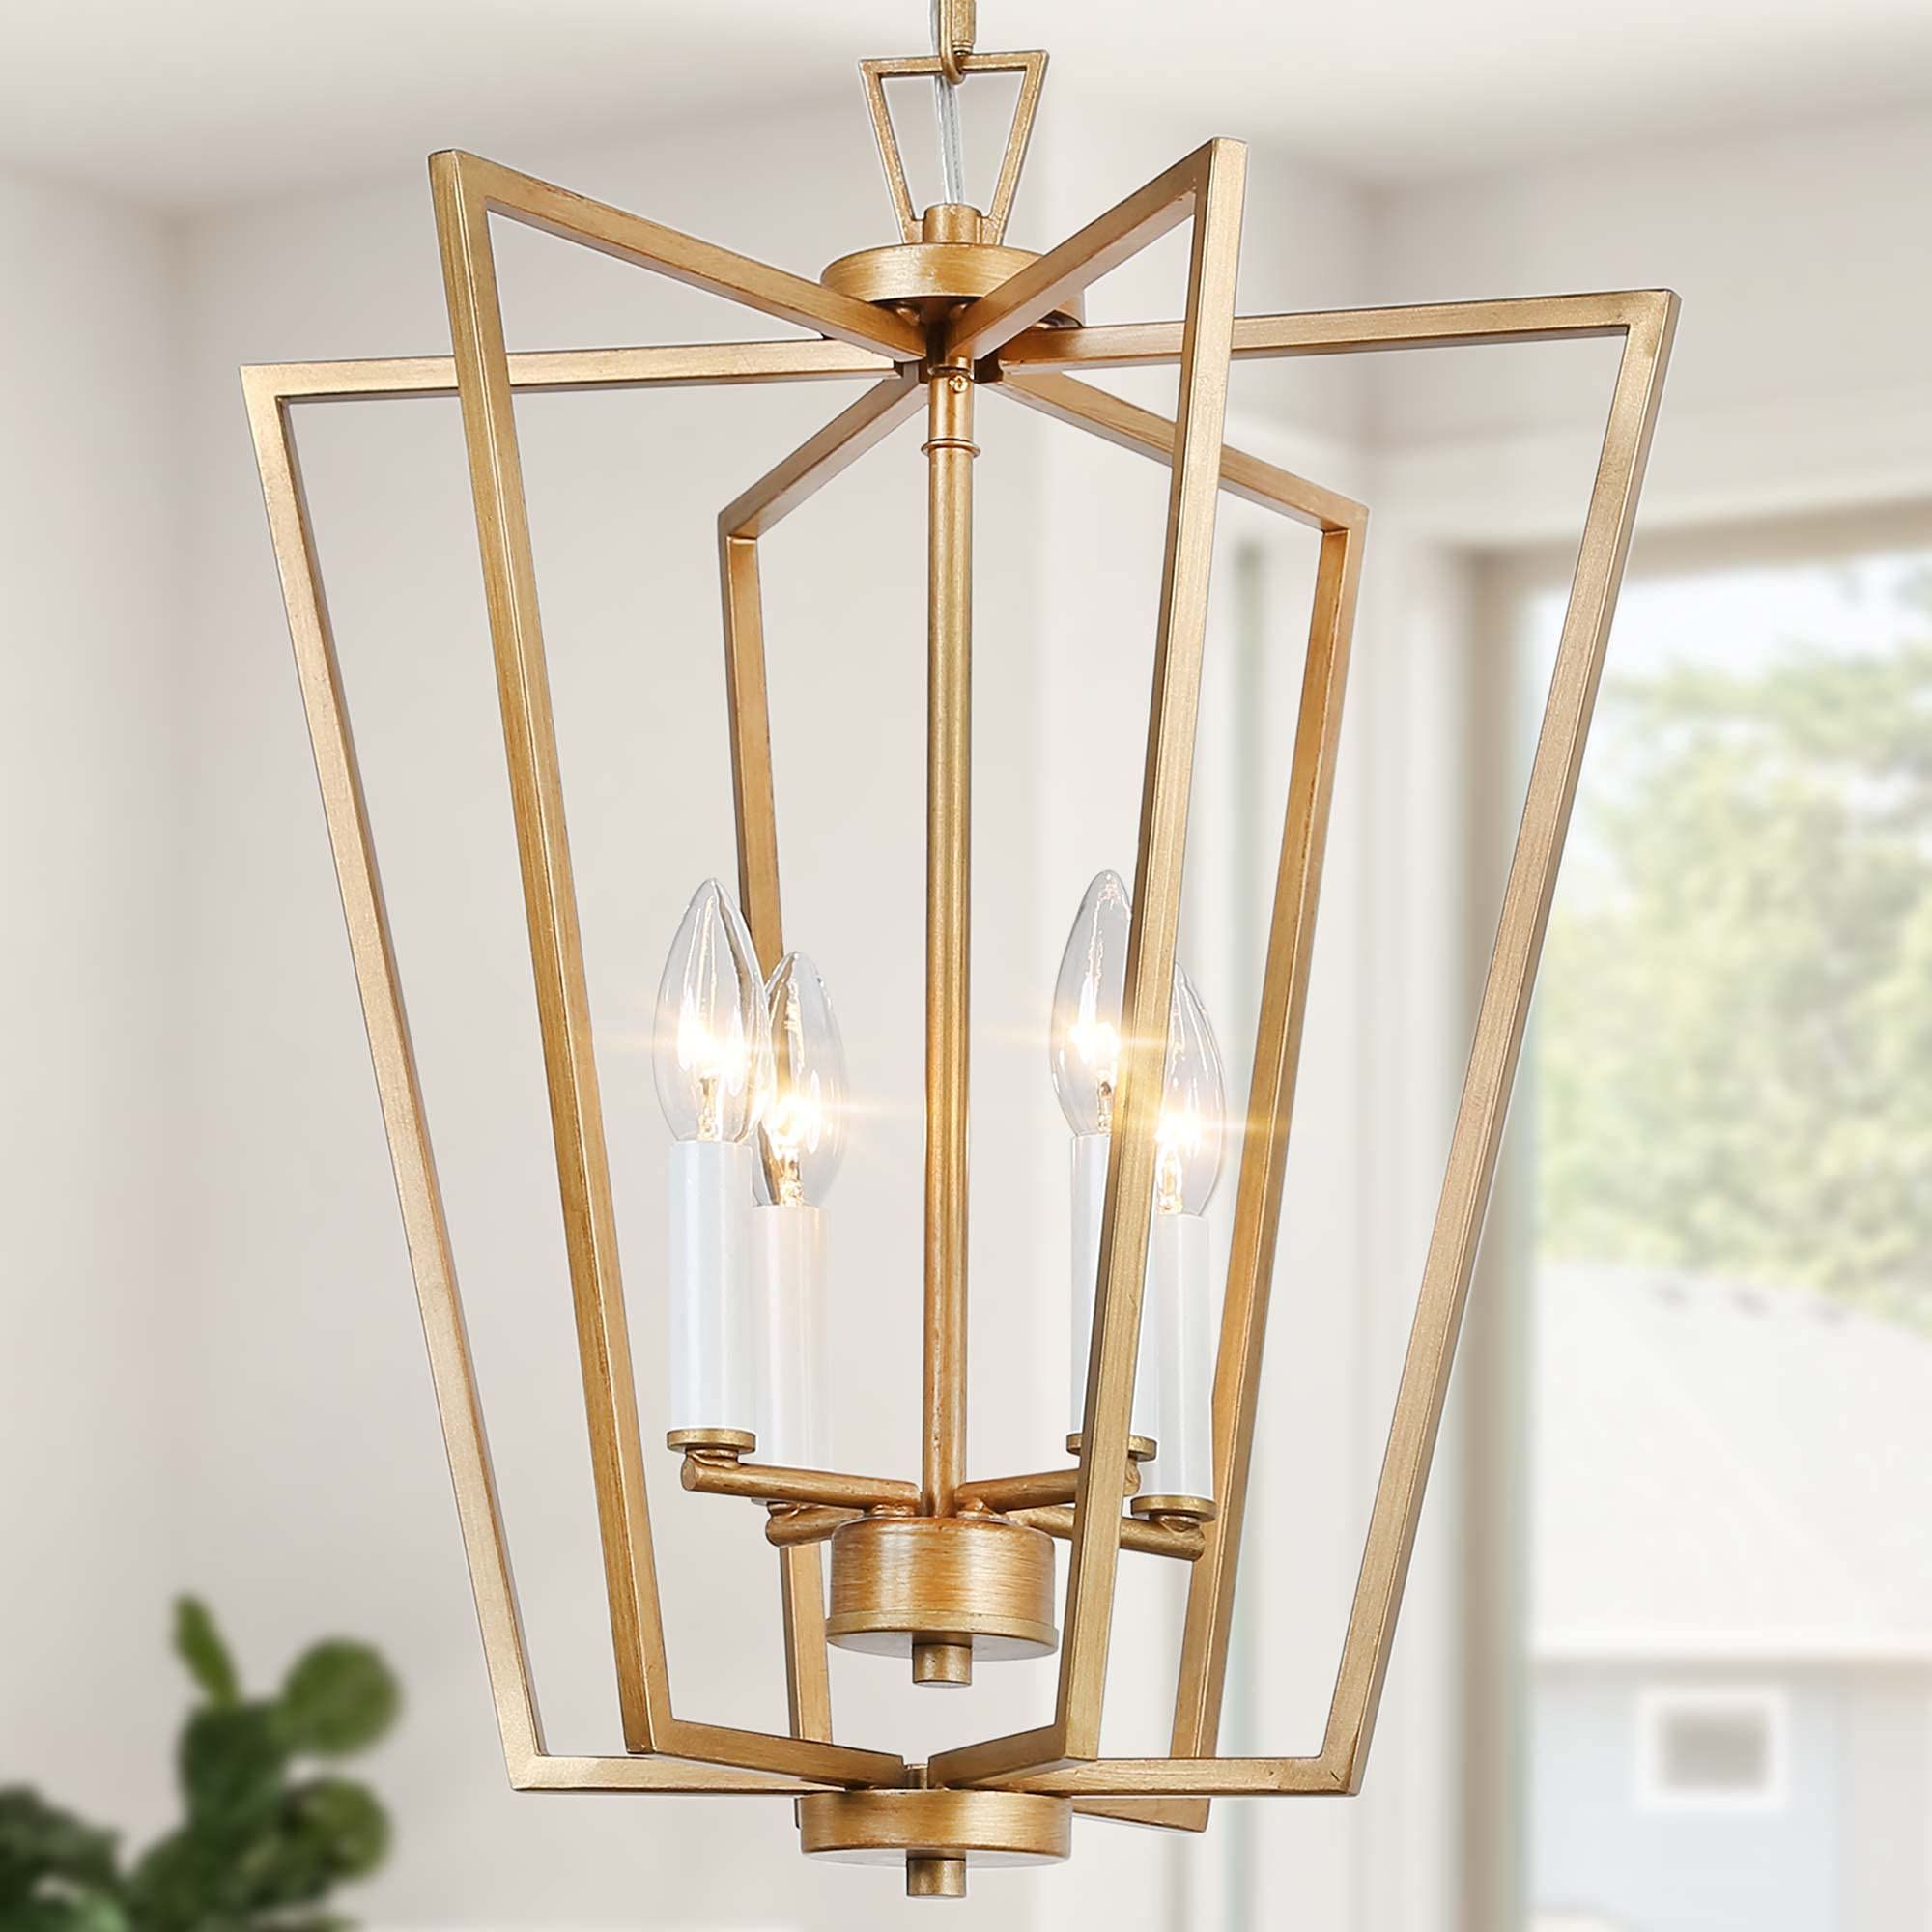 Rusty Gold Lantern Chandeliers Intended For Recent Gold Chandelier, 4 Light Modern Lantern Gold Pendant Light With Rotatable  Framework For Kitchen Island, Dining Room, Foyer And Entryway, Antique  Brushed Gold,  (View 3 of 10)